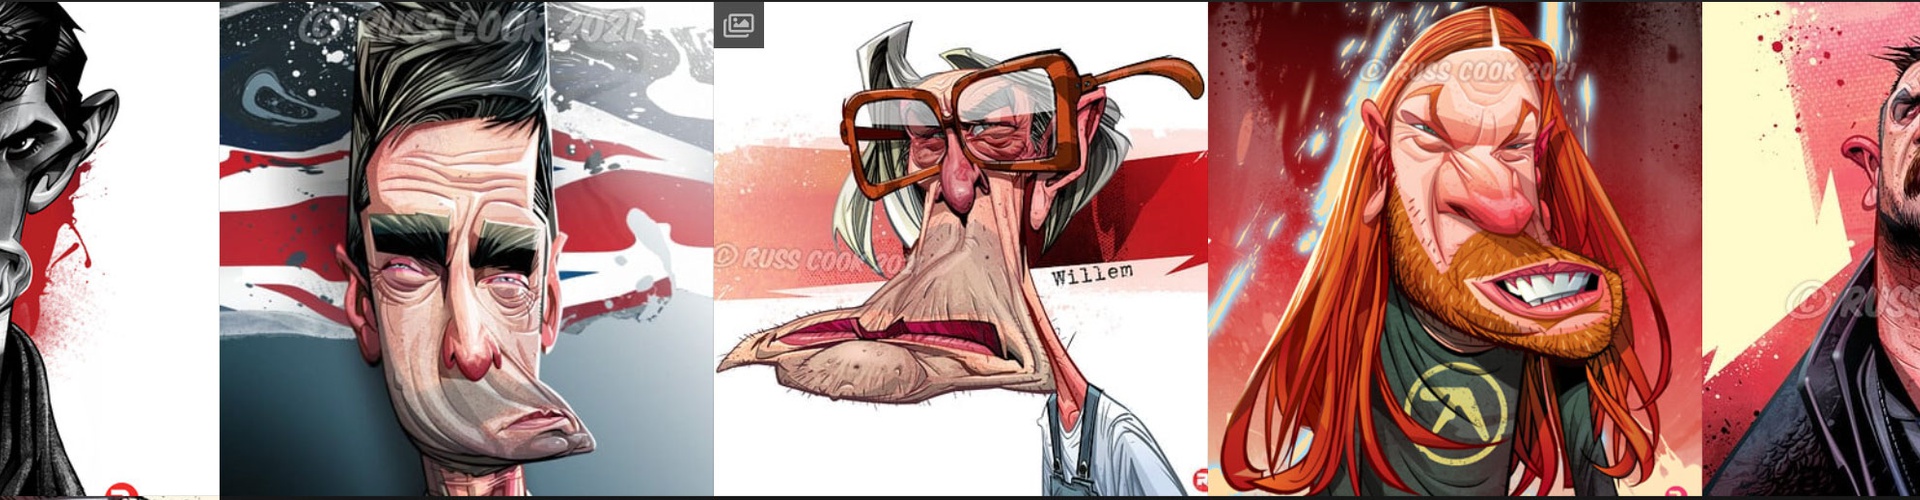 Gallery of Caricature by Russ Cook -UK